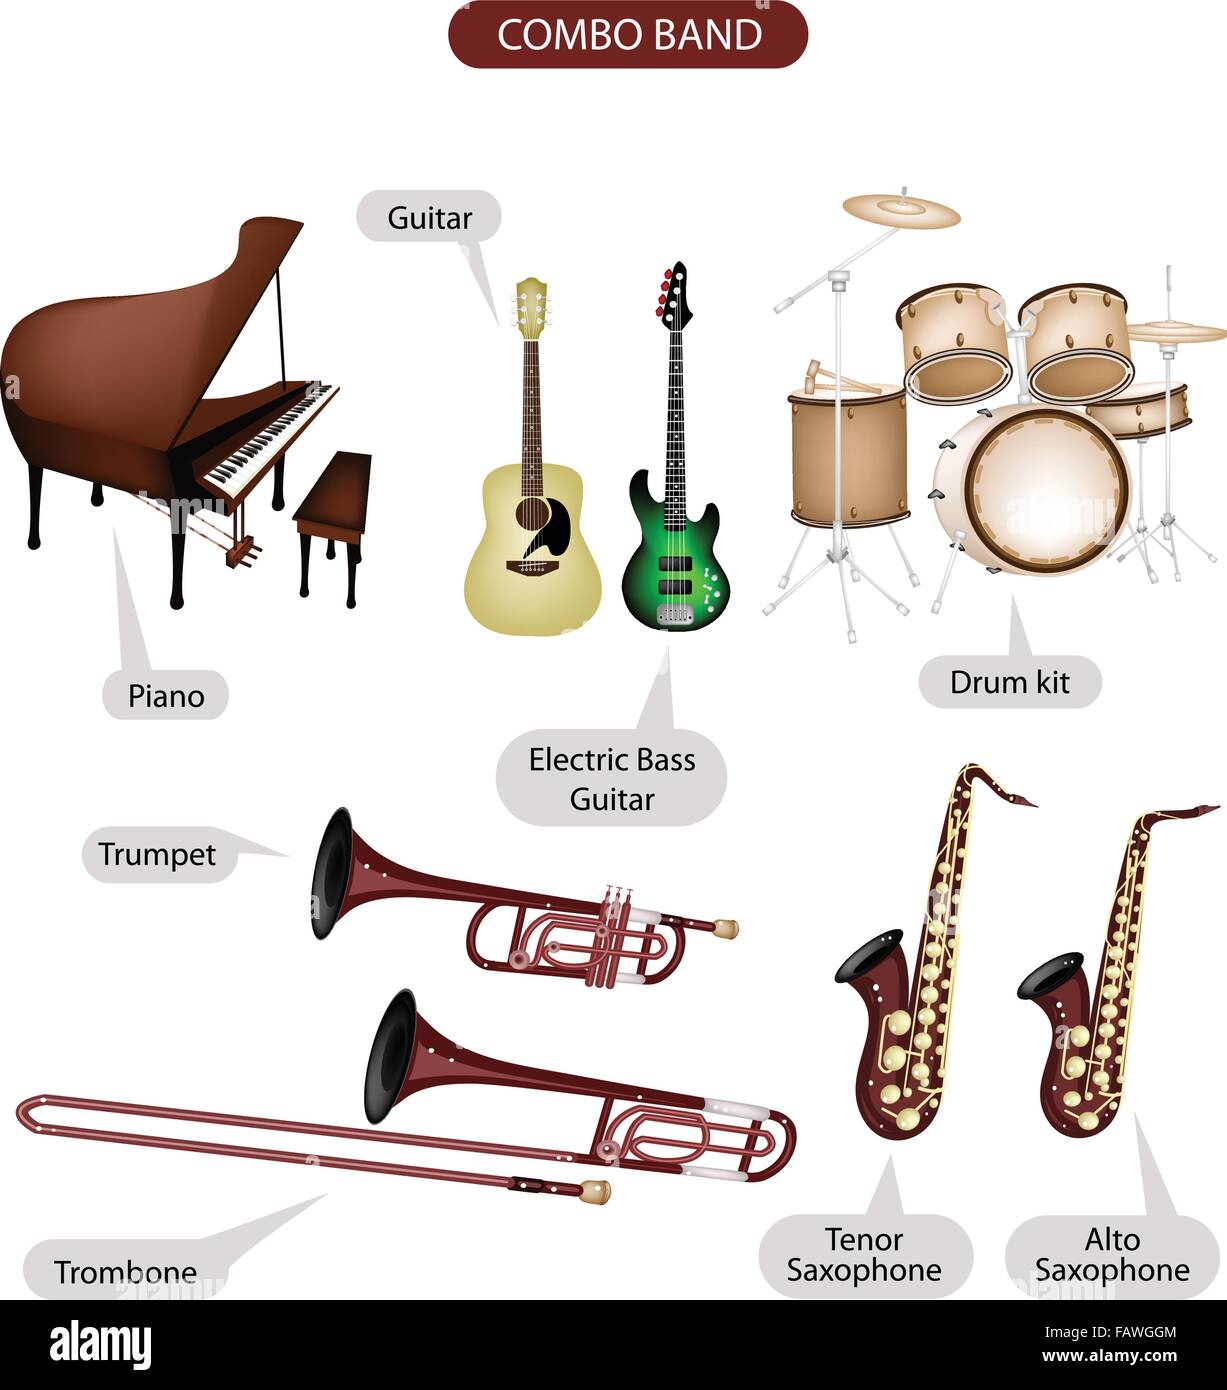 Illustration Brown Color Collection of Musical Instruments Combo Brand, Piano, Guitar, Electric Bass Guitar, Drum Kit, Trumpet, Stock Vector